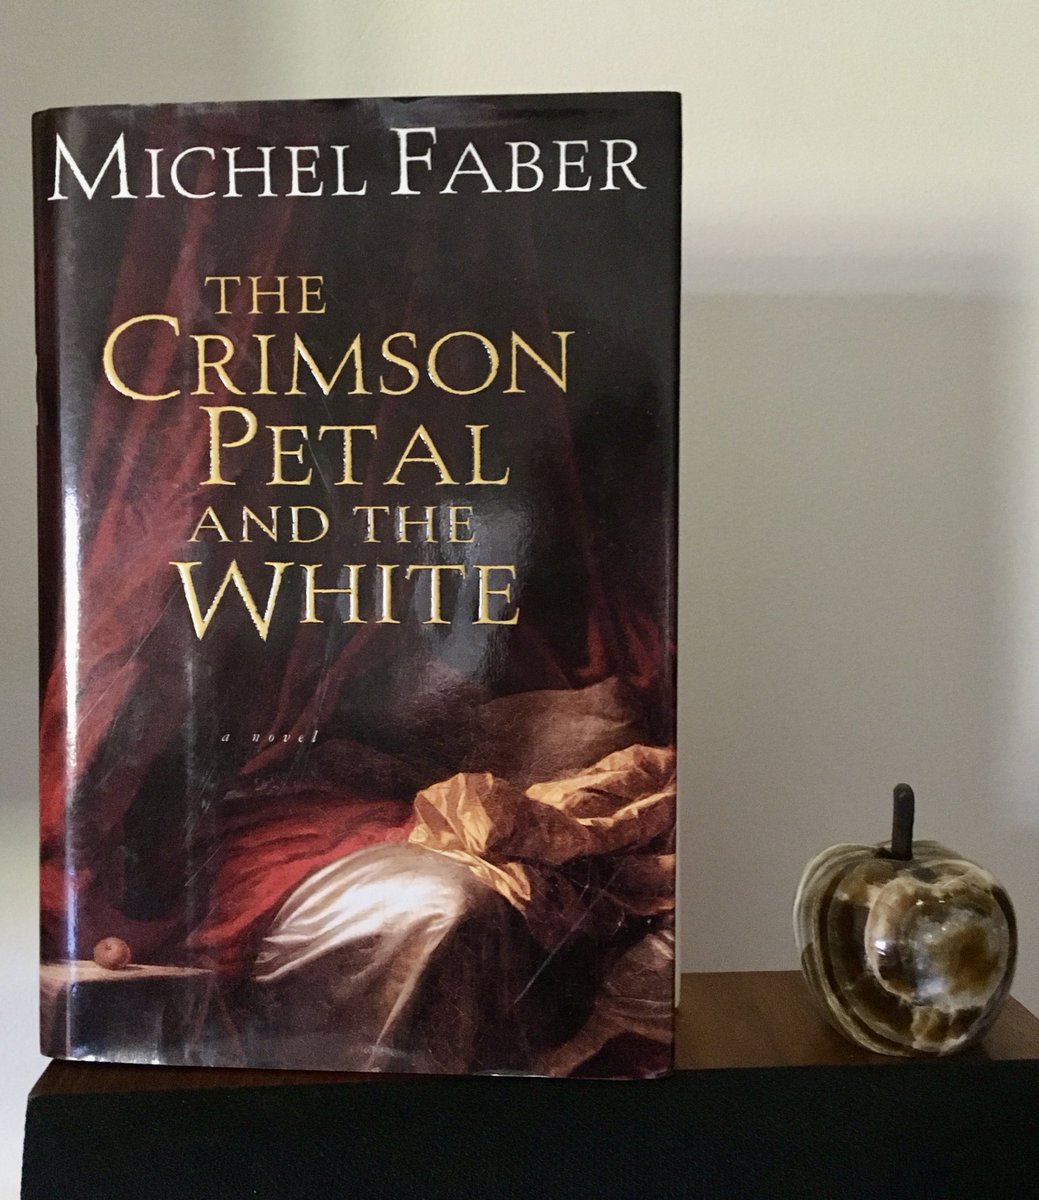 When was the last time you read a novel that was so wonderful you were genuinely sad to see it coming to an end? #CrimsonPetalandtheWhite #MichelFaber #BookTwitter #VictorianFiction 🥀